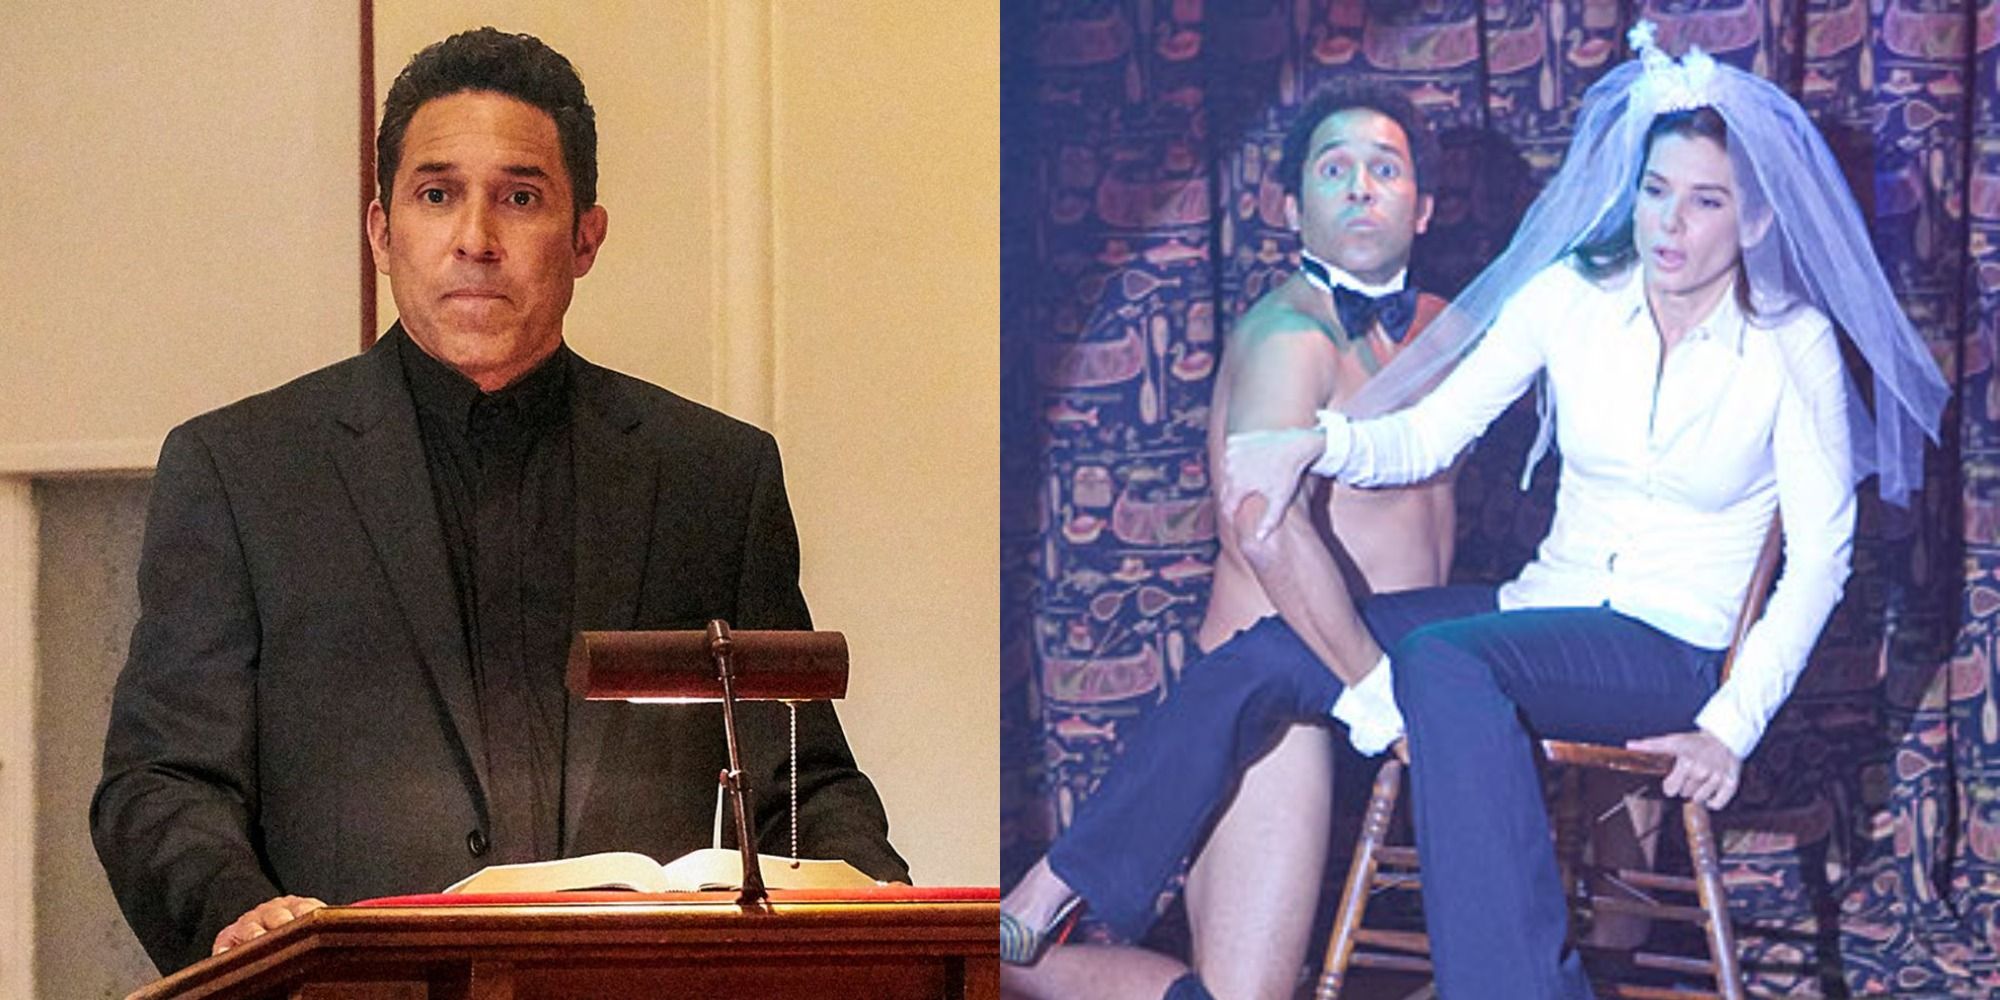 Split image showing Oscar Niñez in People Of Earth and The proposal.